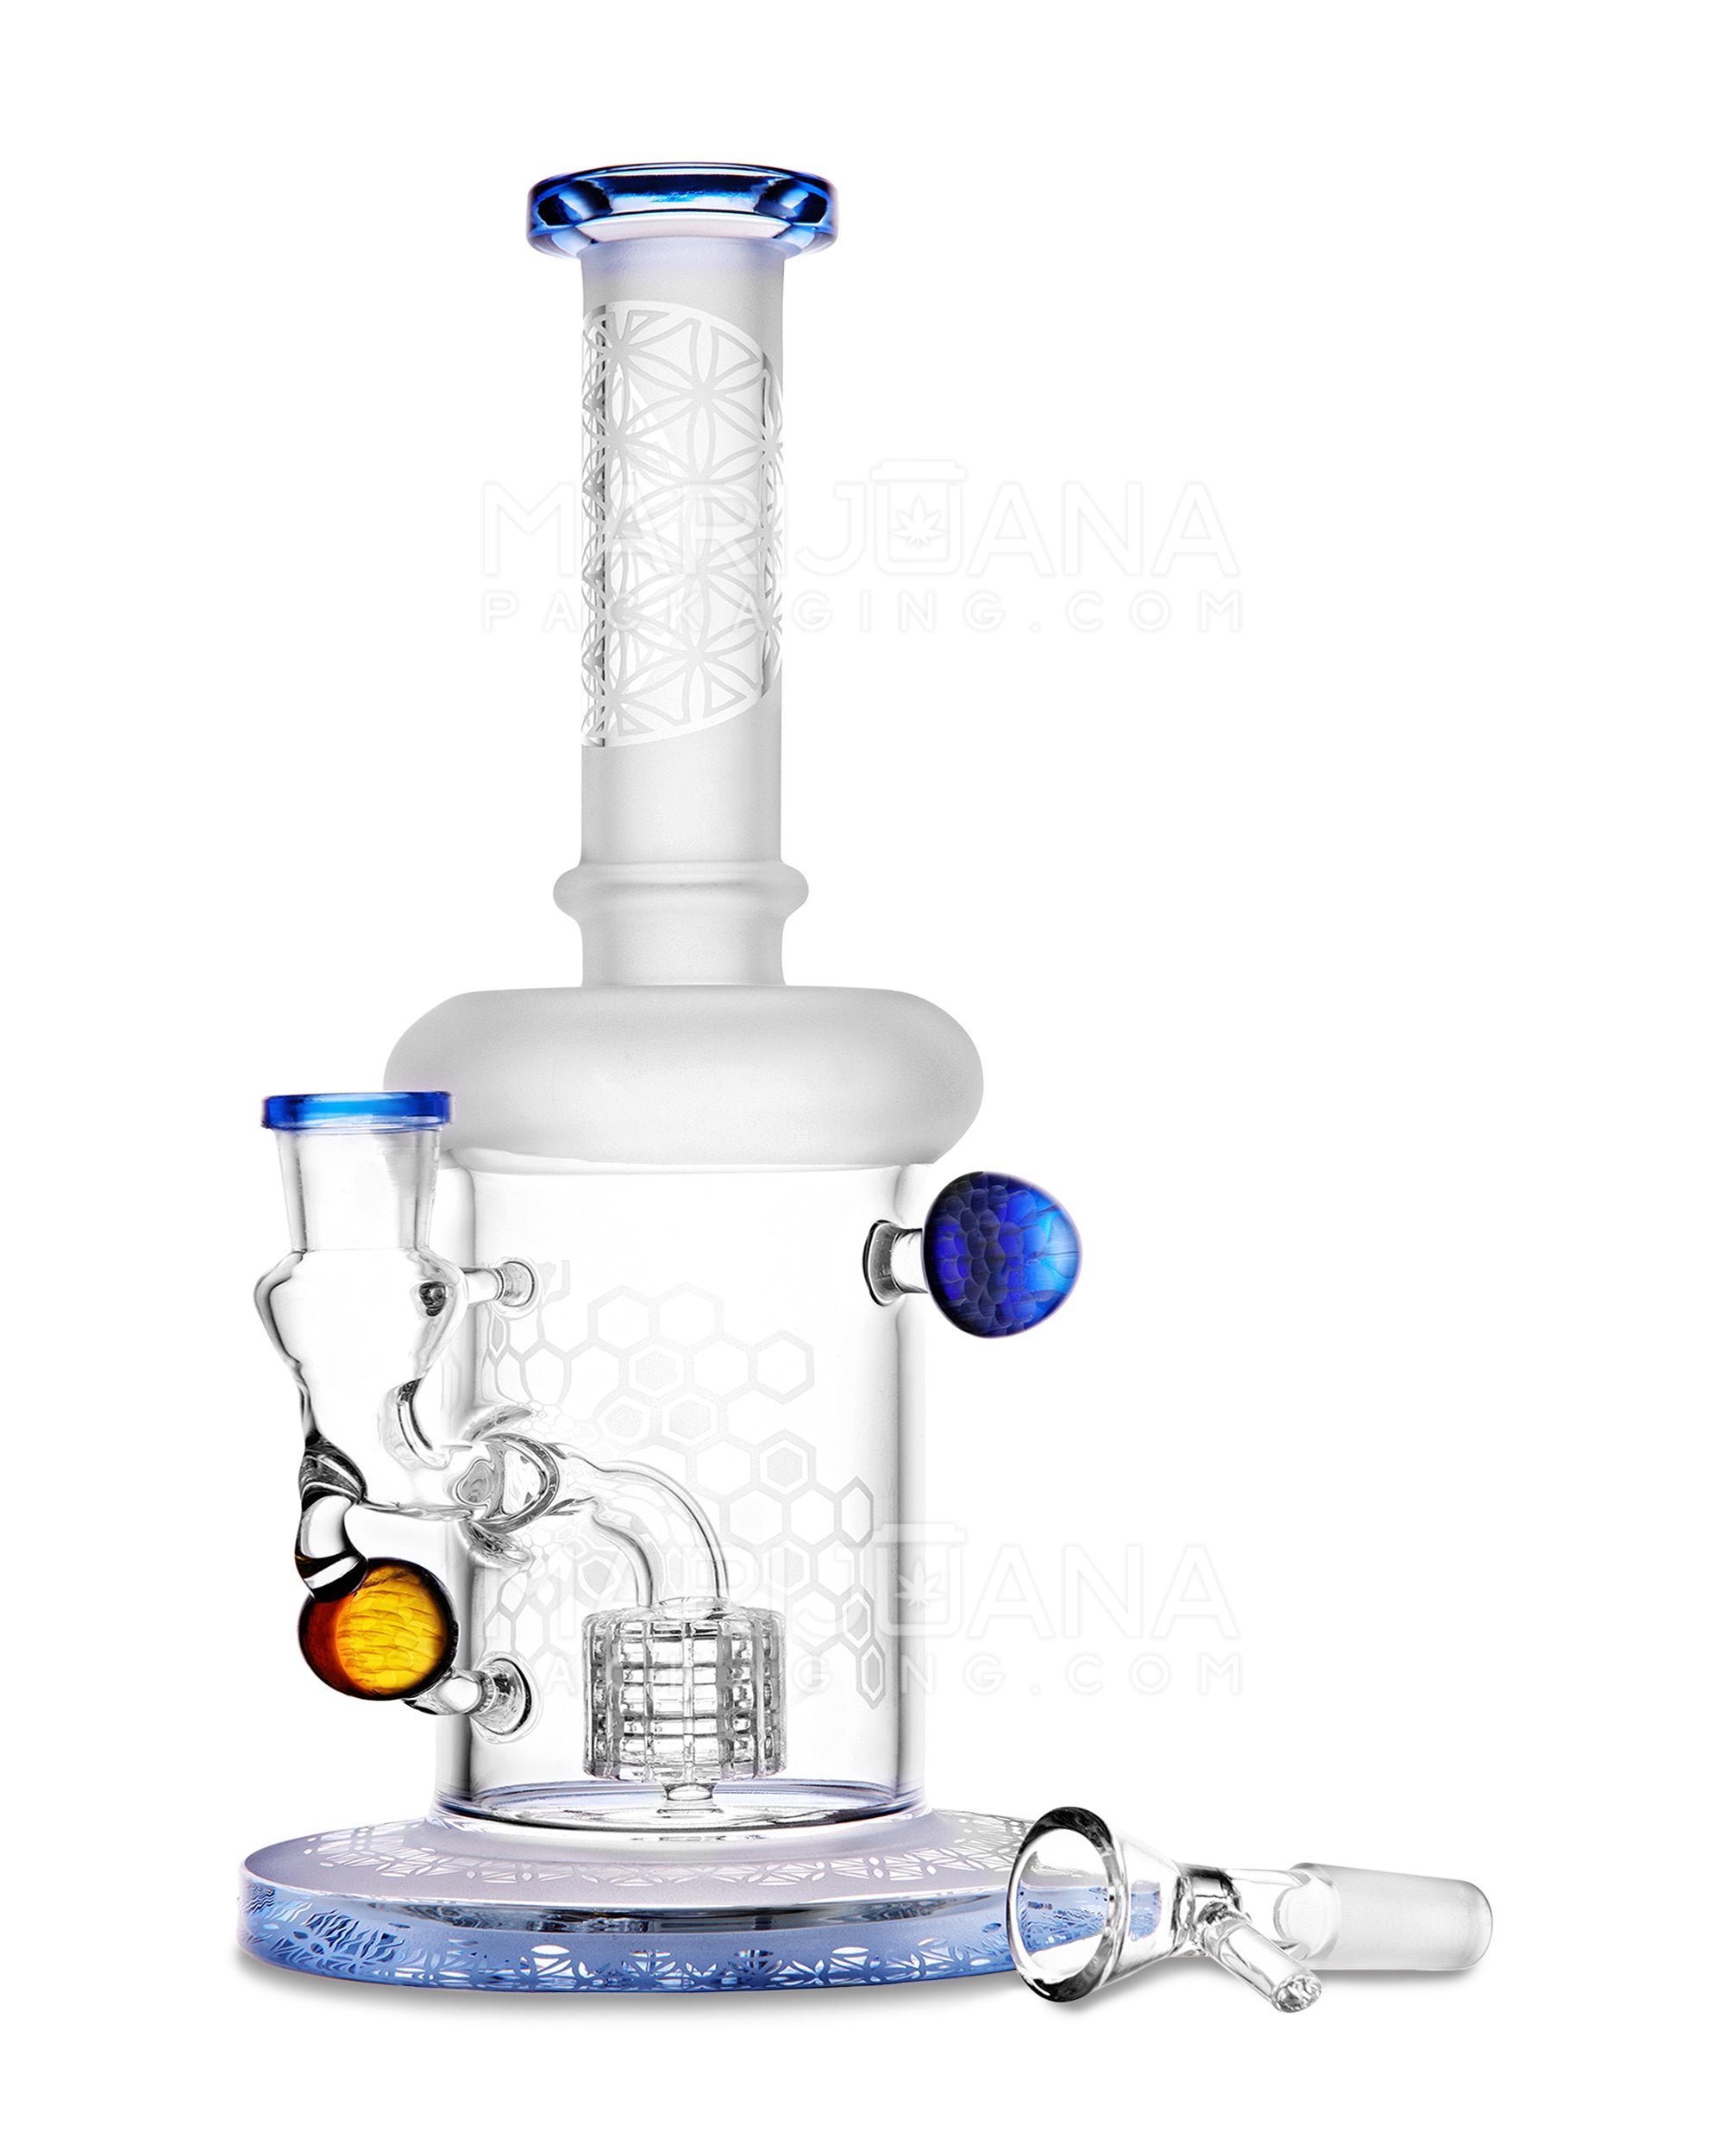 USA Glass | Straight Neck Matrix Perc Sandblasted Glass Water Pipe w/ Implosion Marbles | 11in Tall - 14mm Bowl - Blue - 2